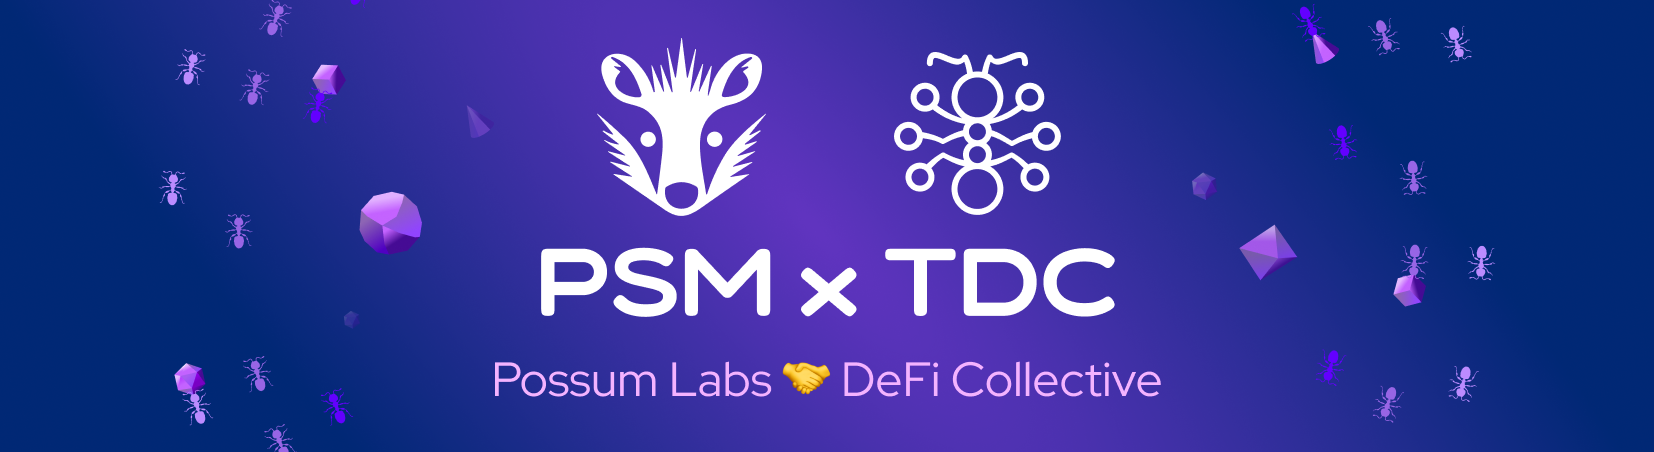 The DeFi Collective is partnering with Possum Labs